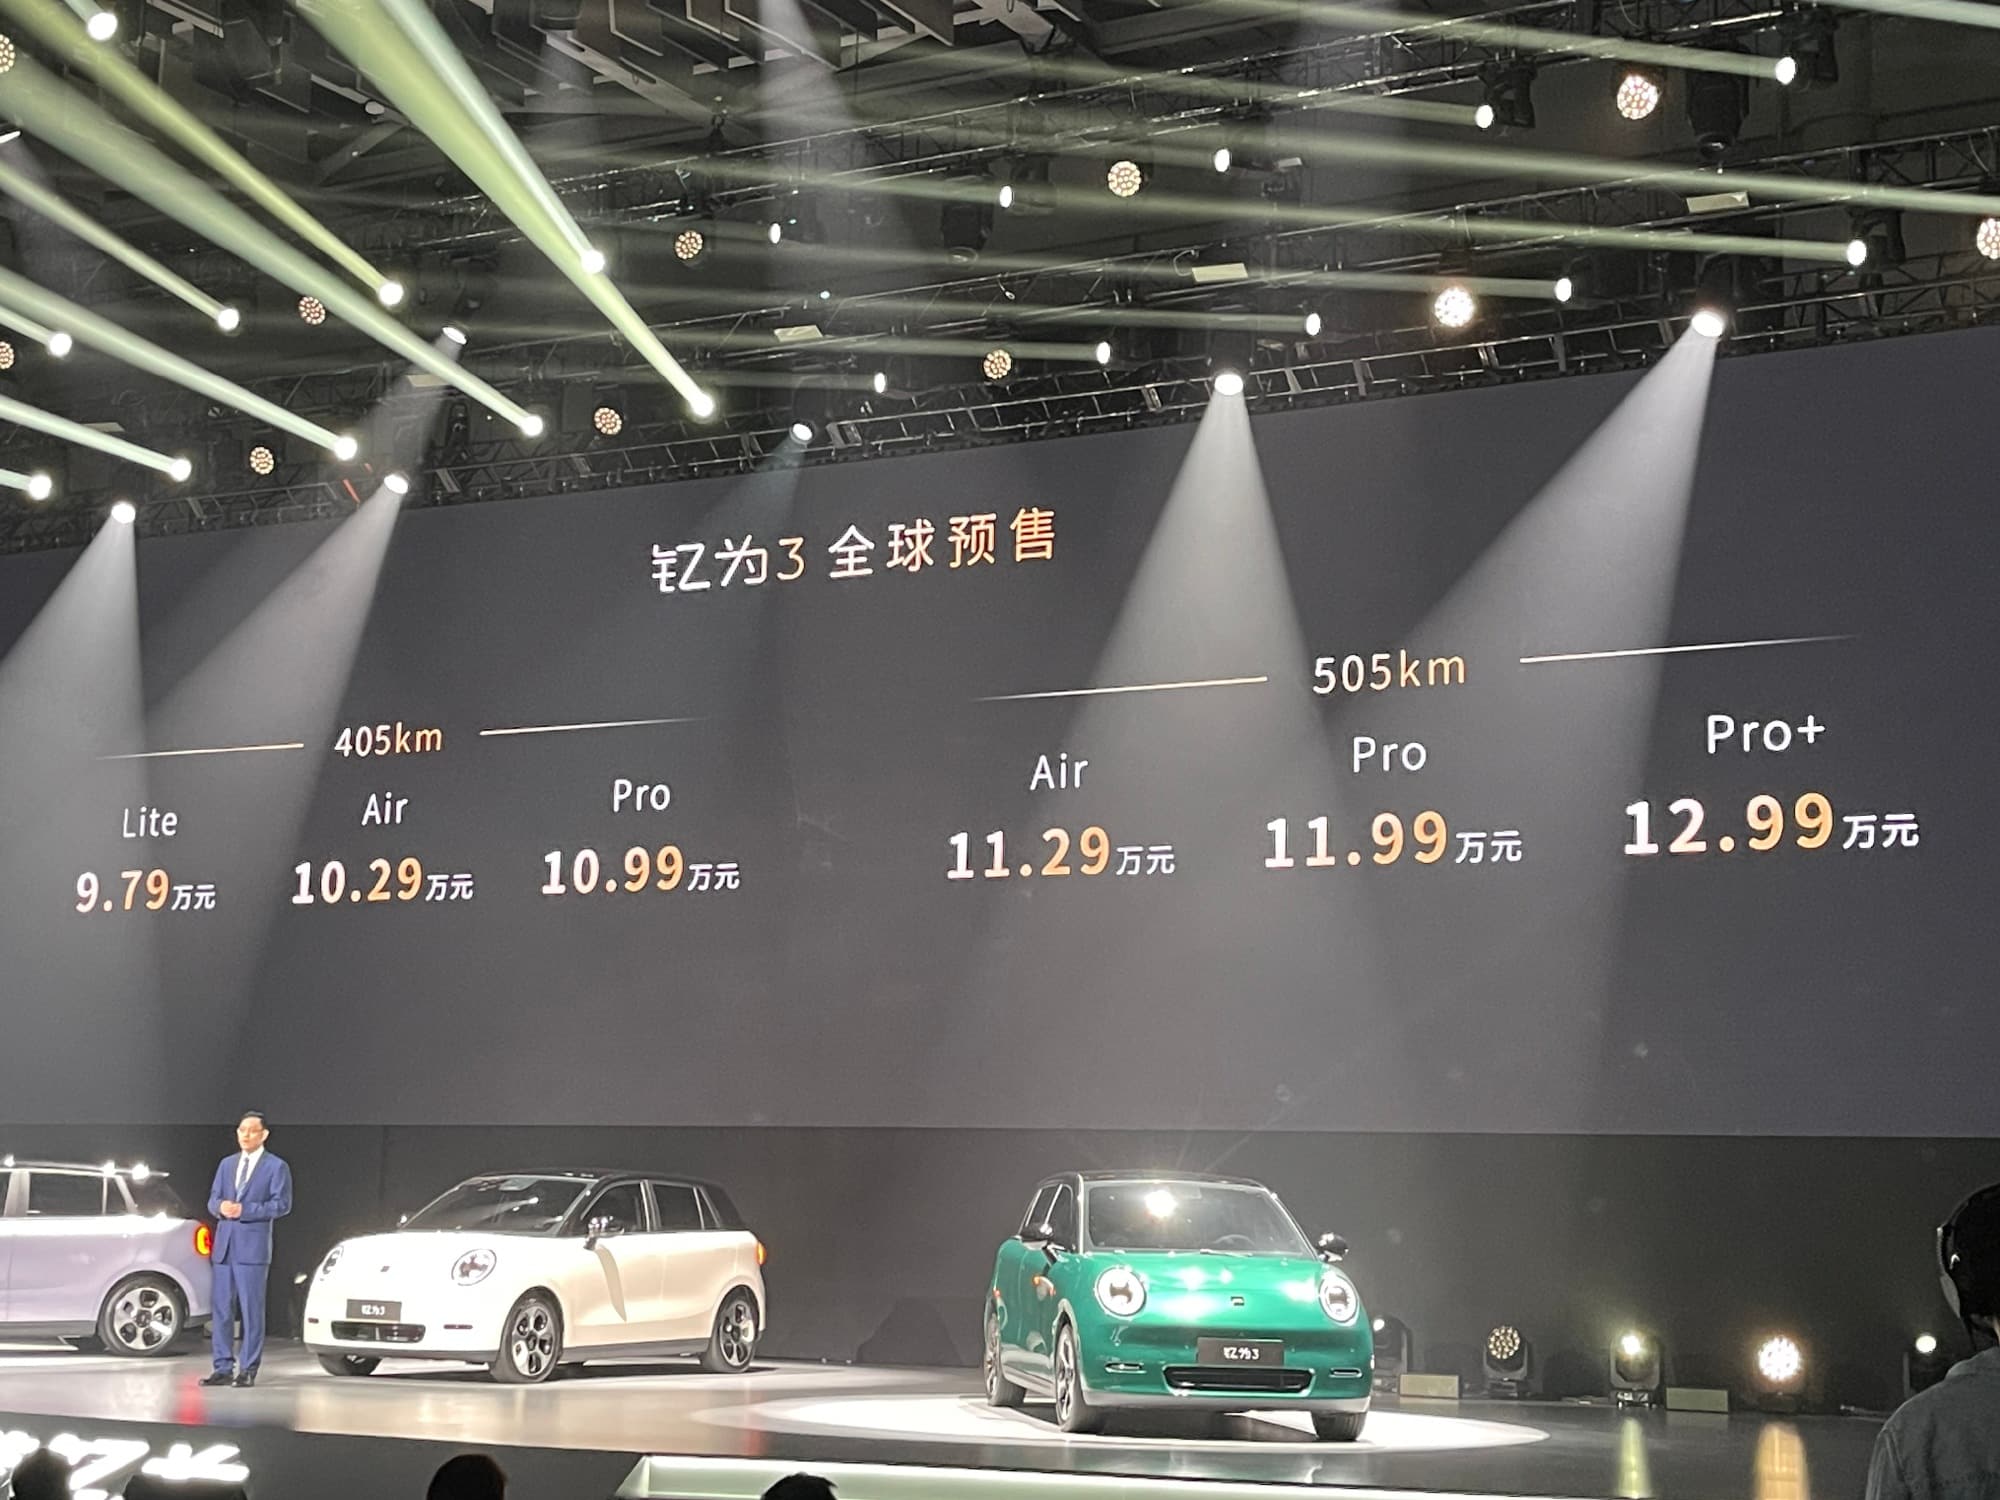 JAC launched new EV with 9-in-1 powertrain under Yiwei new brand